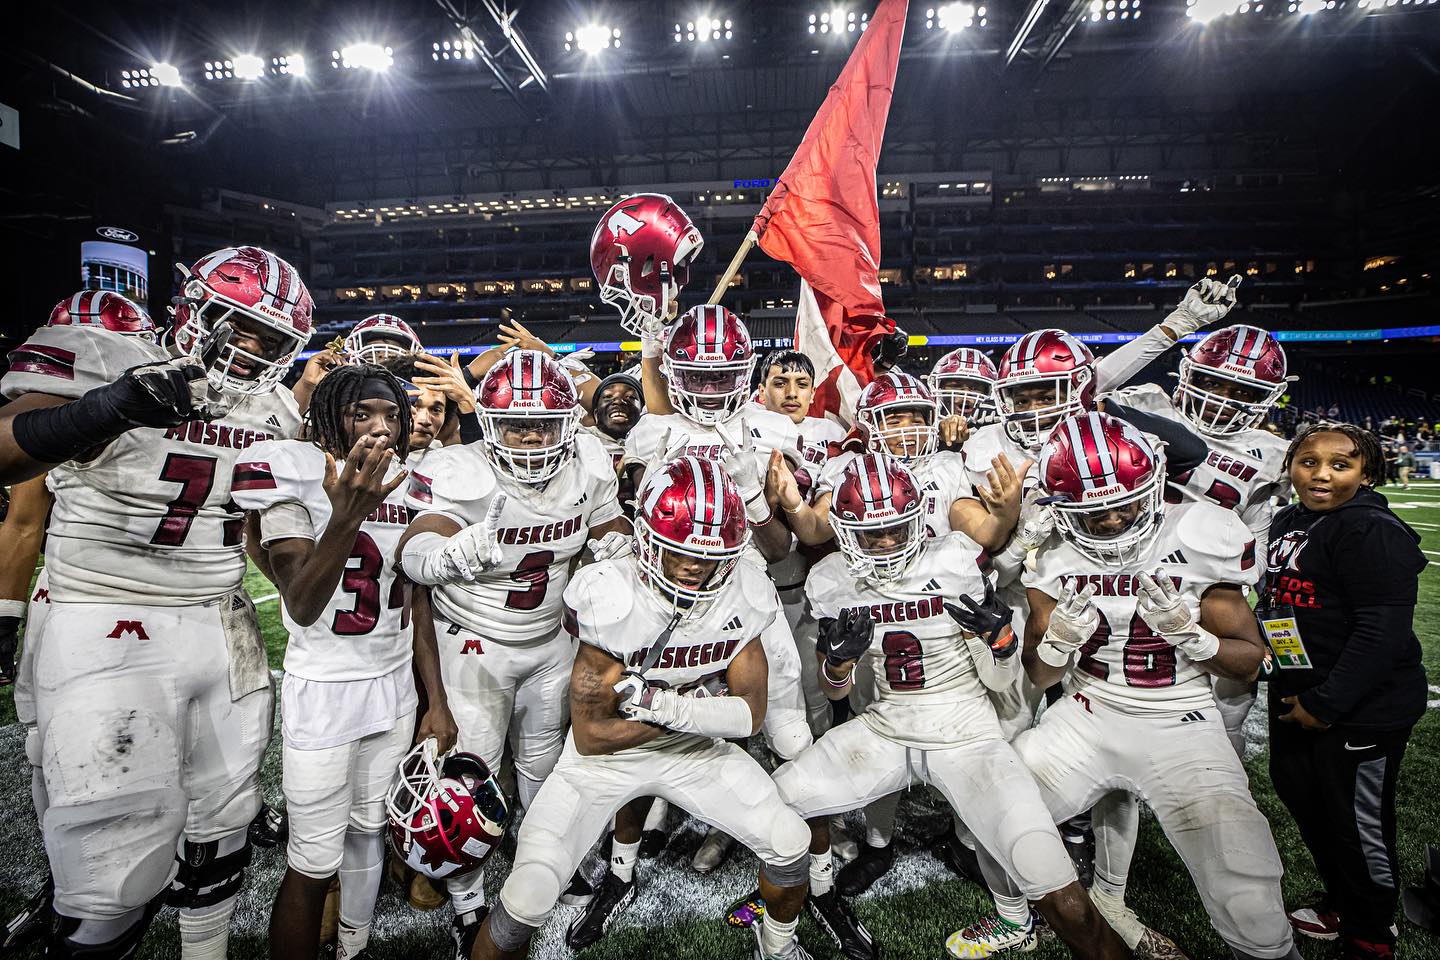 Tom’s Two Cents:  Win No. 900 is the best win in 129 years of Muskegon High School football